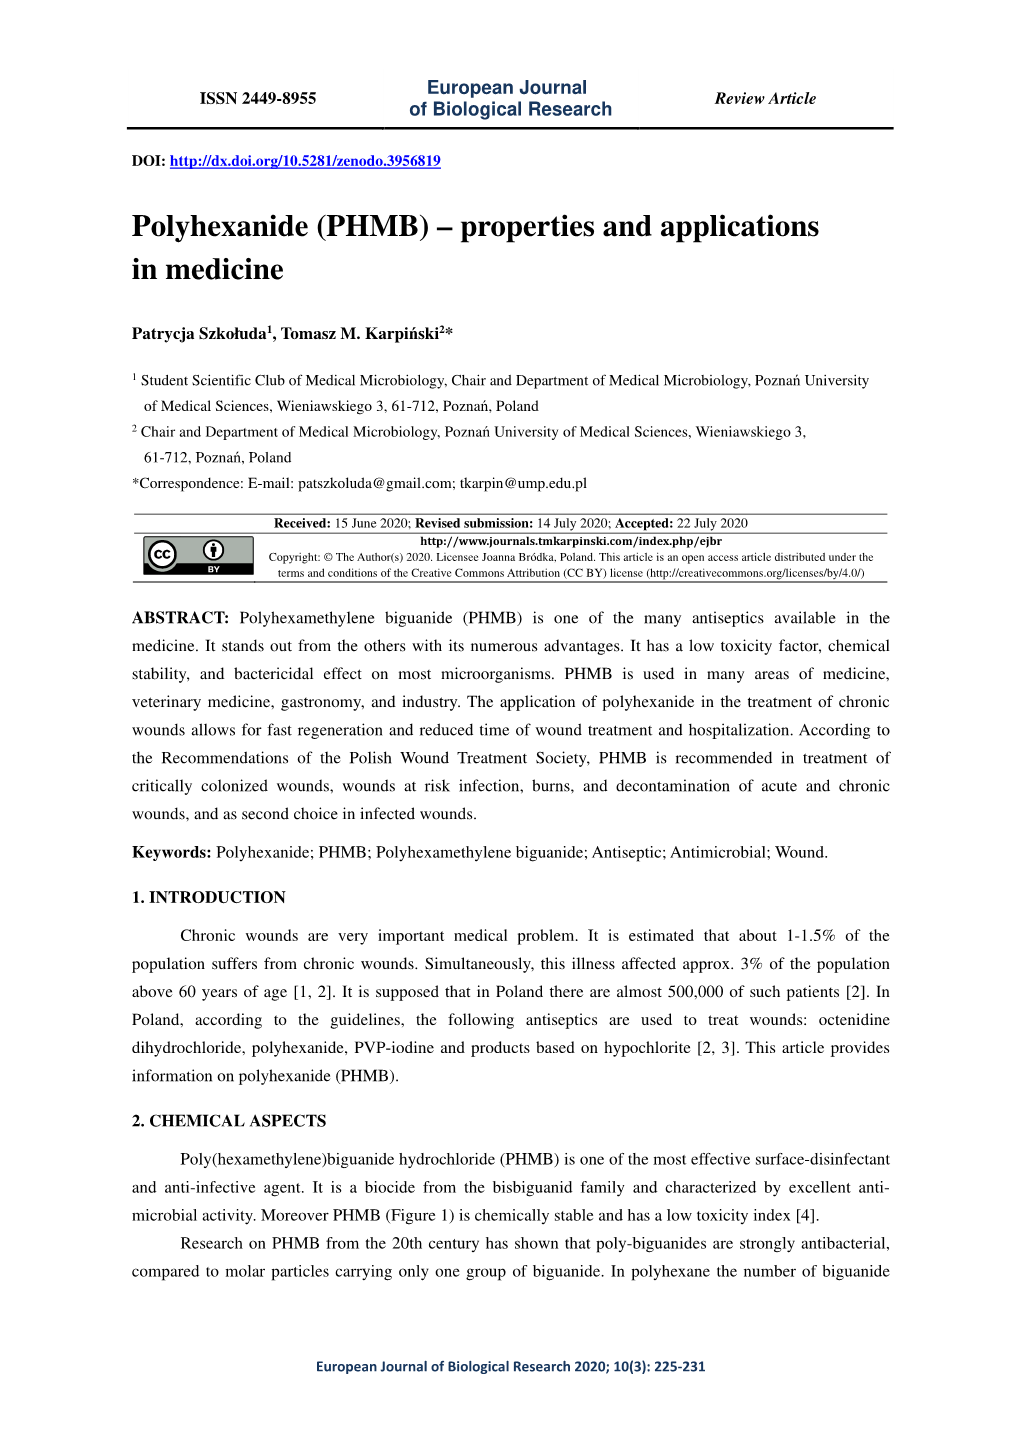 Polyhexanide (PHMB) – Properties and Applications in Medicine